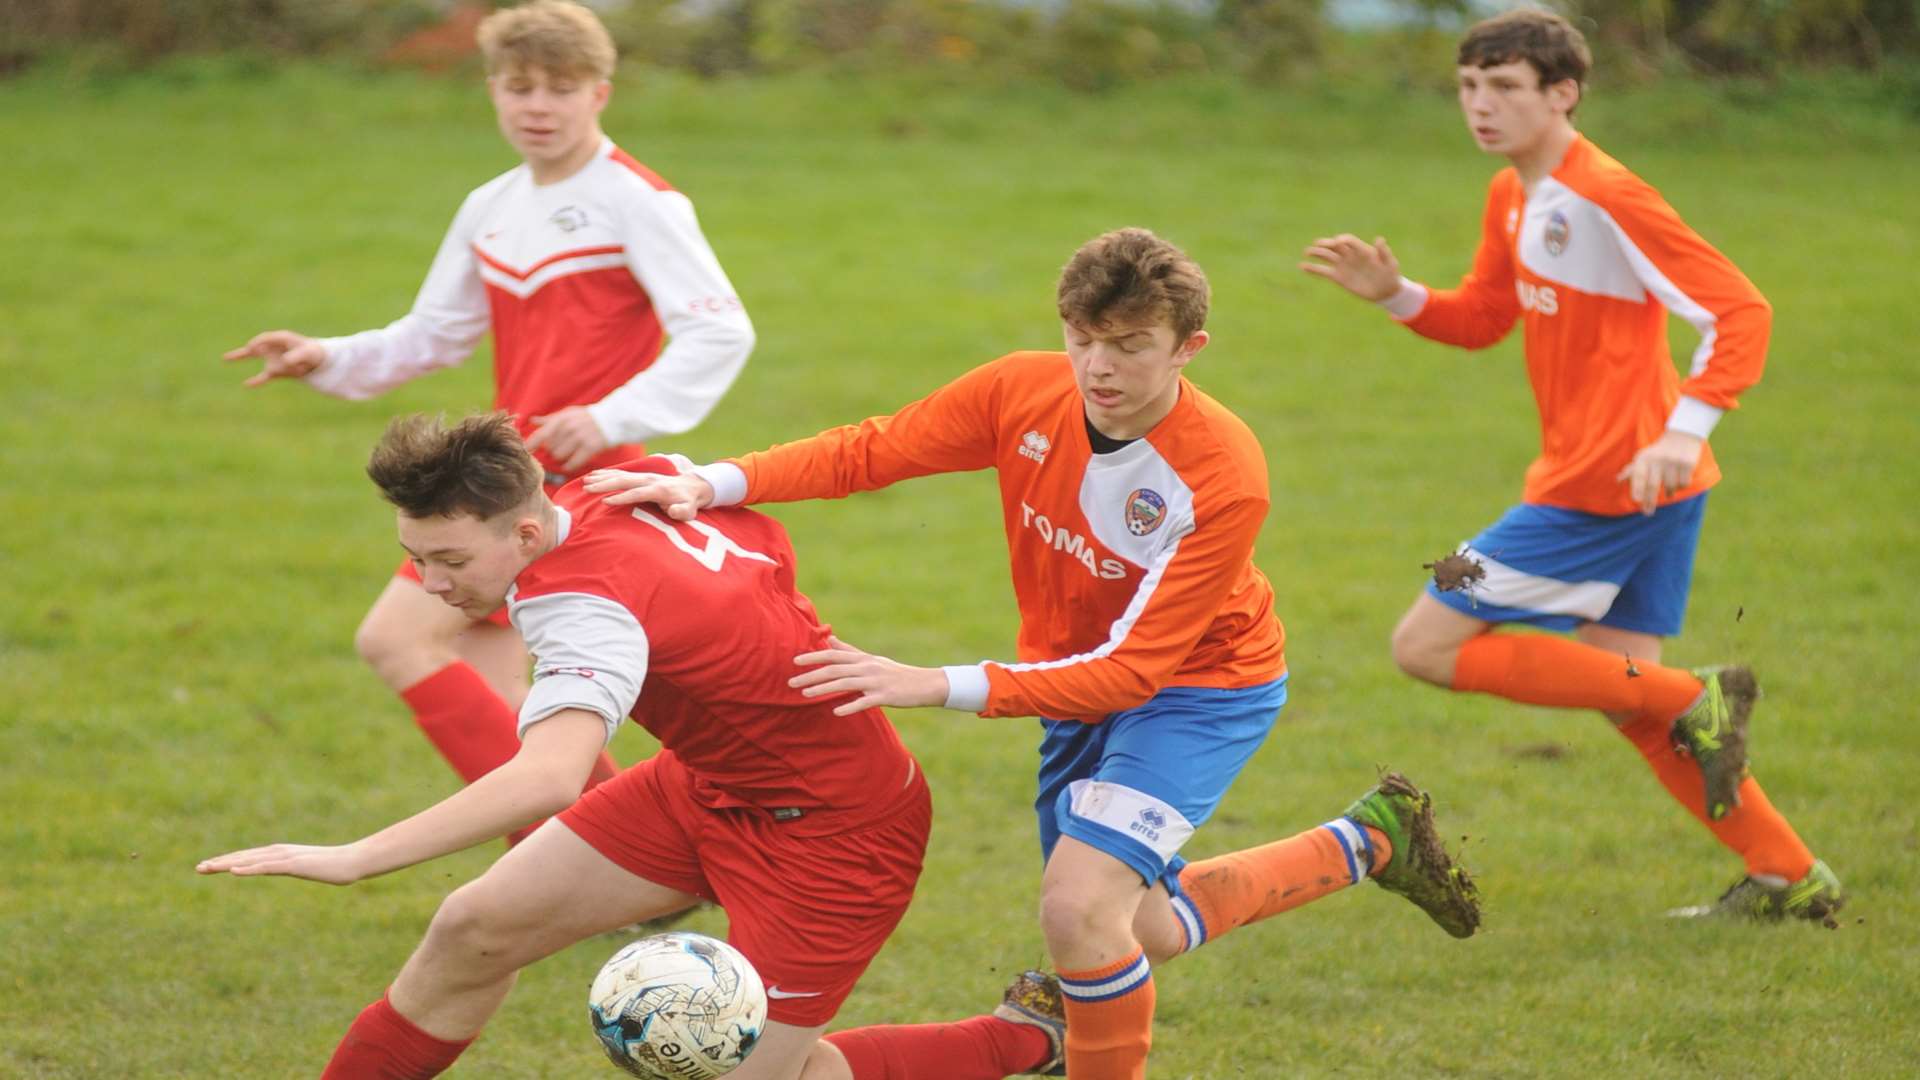 Rainham Eagles (red) under pressure from Cuxton 91 in the Under-16 League Cup second round Picture: Steve Crispe